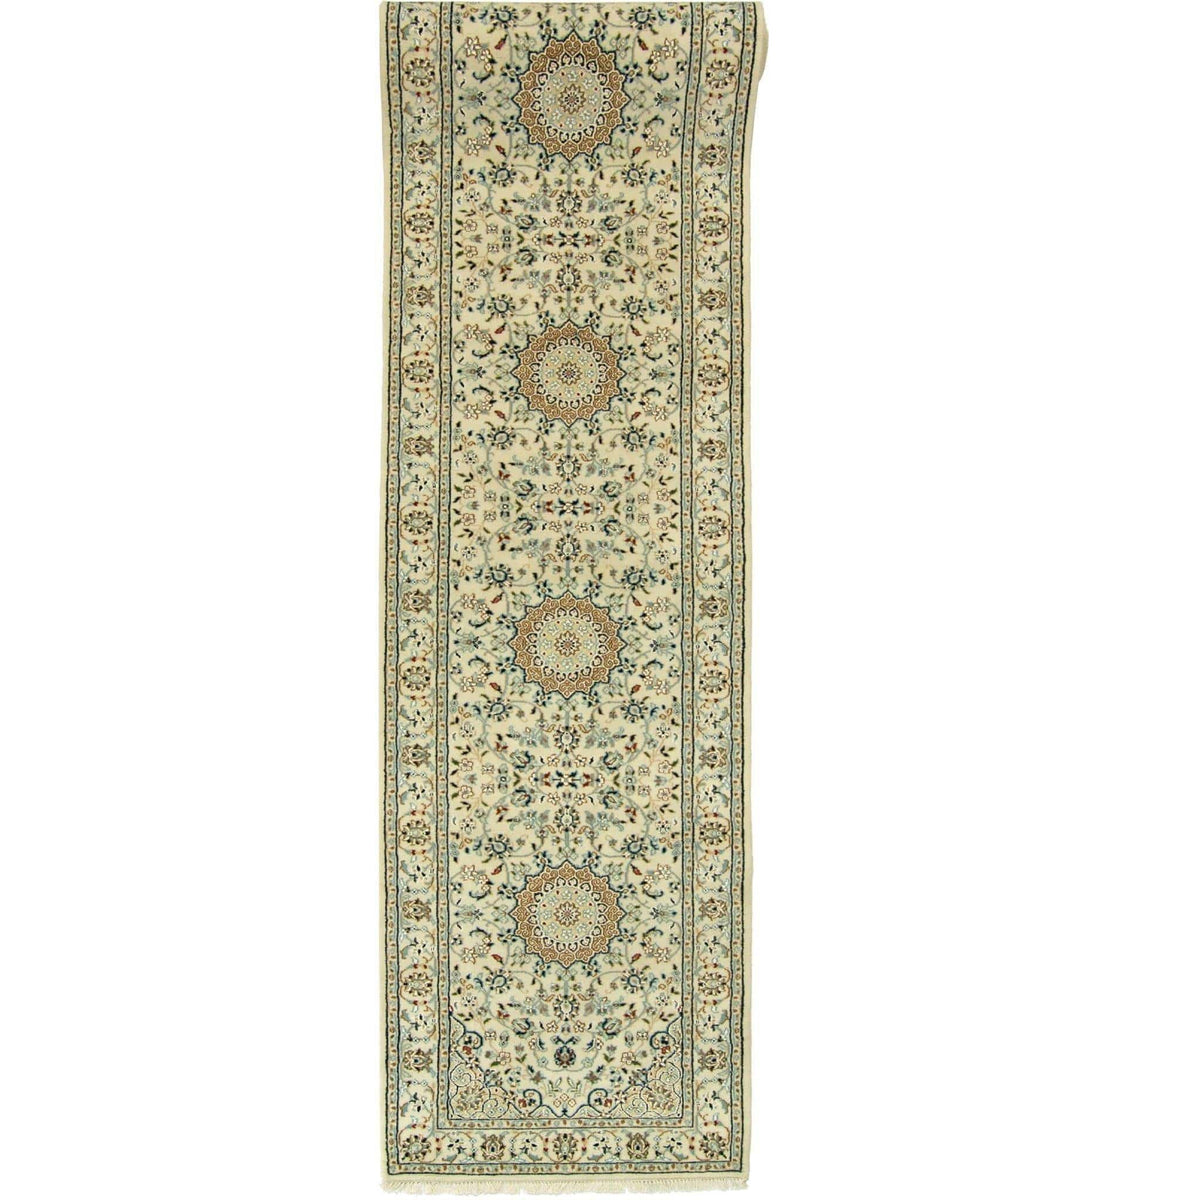 Fine Hand-knotted Wool Nain Design Runner 78cm x 366cm